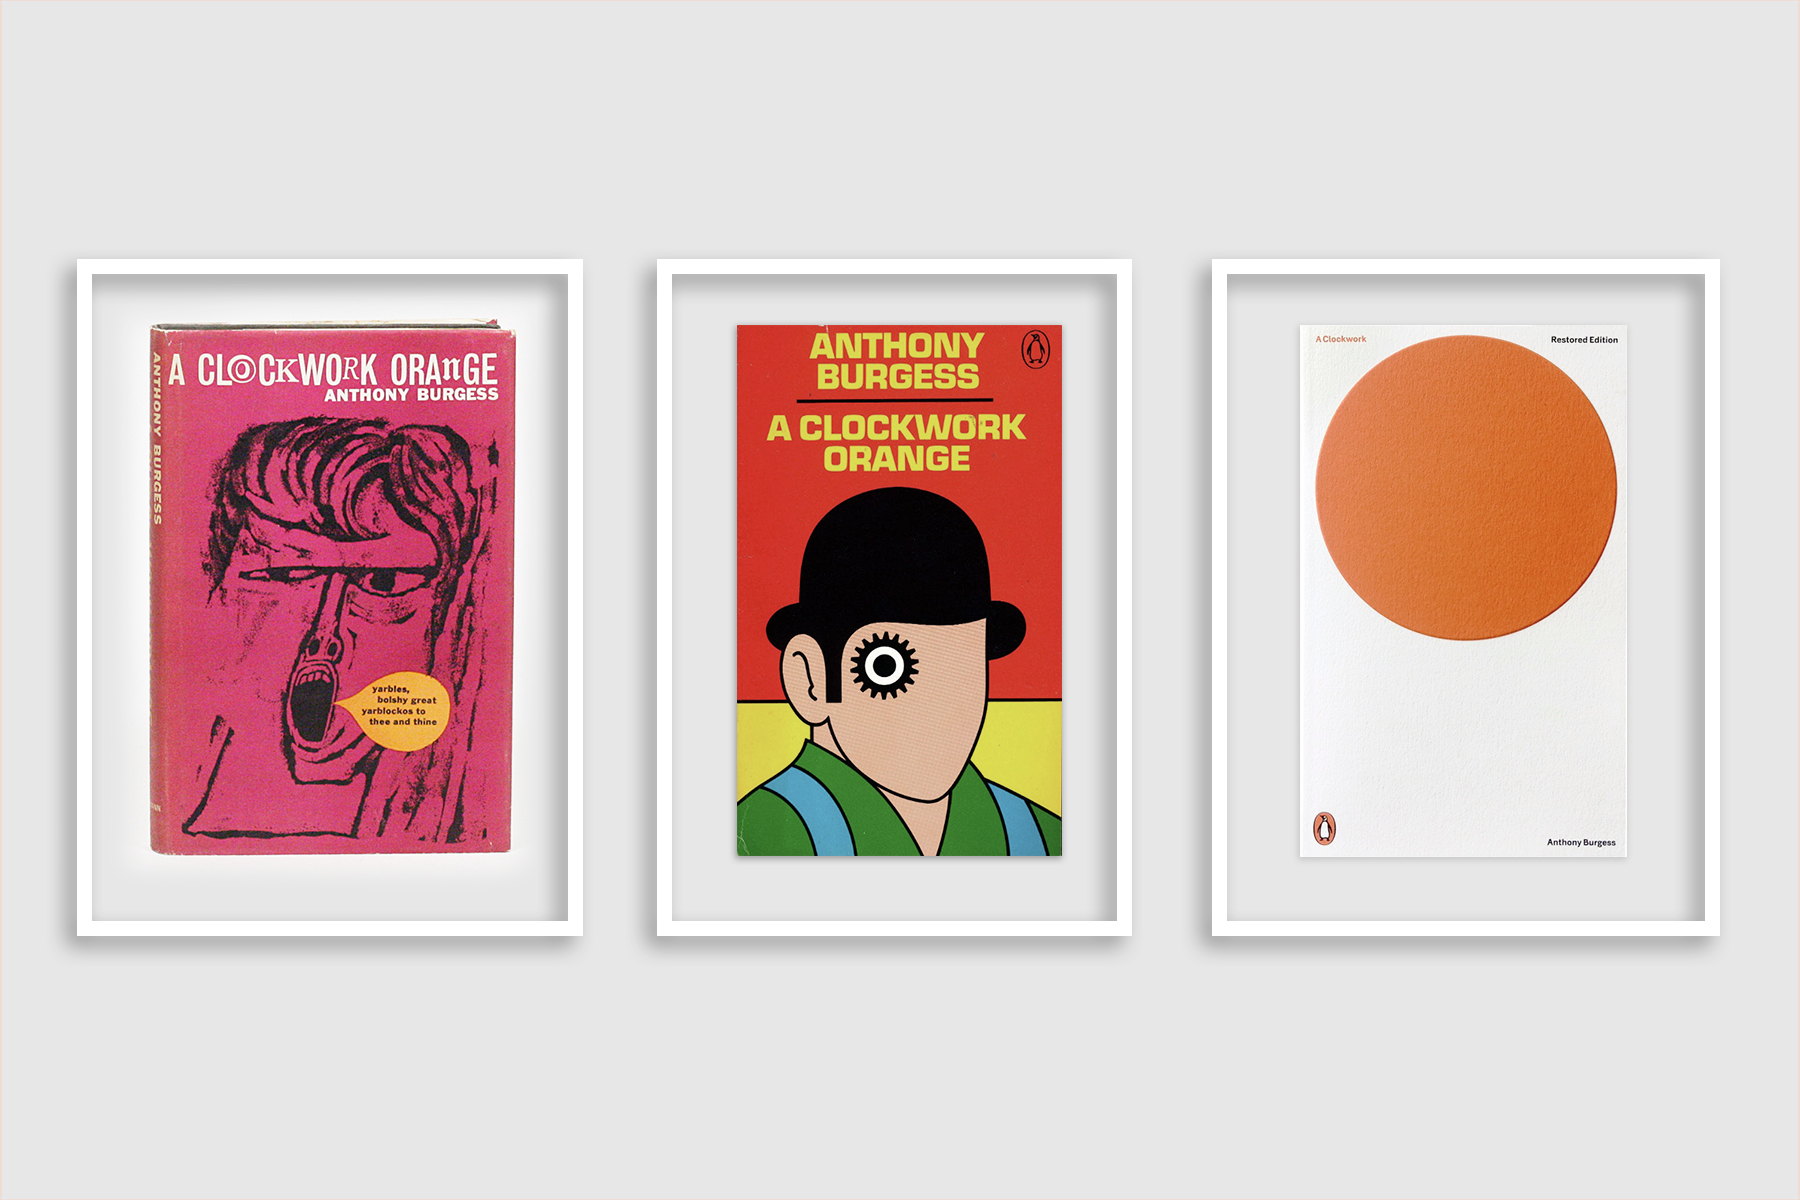 A Clockwork Orange covers through the years. Image: Penguin